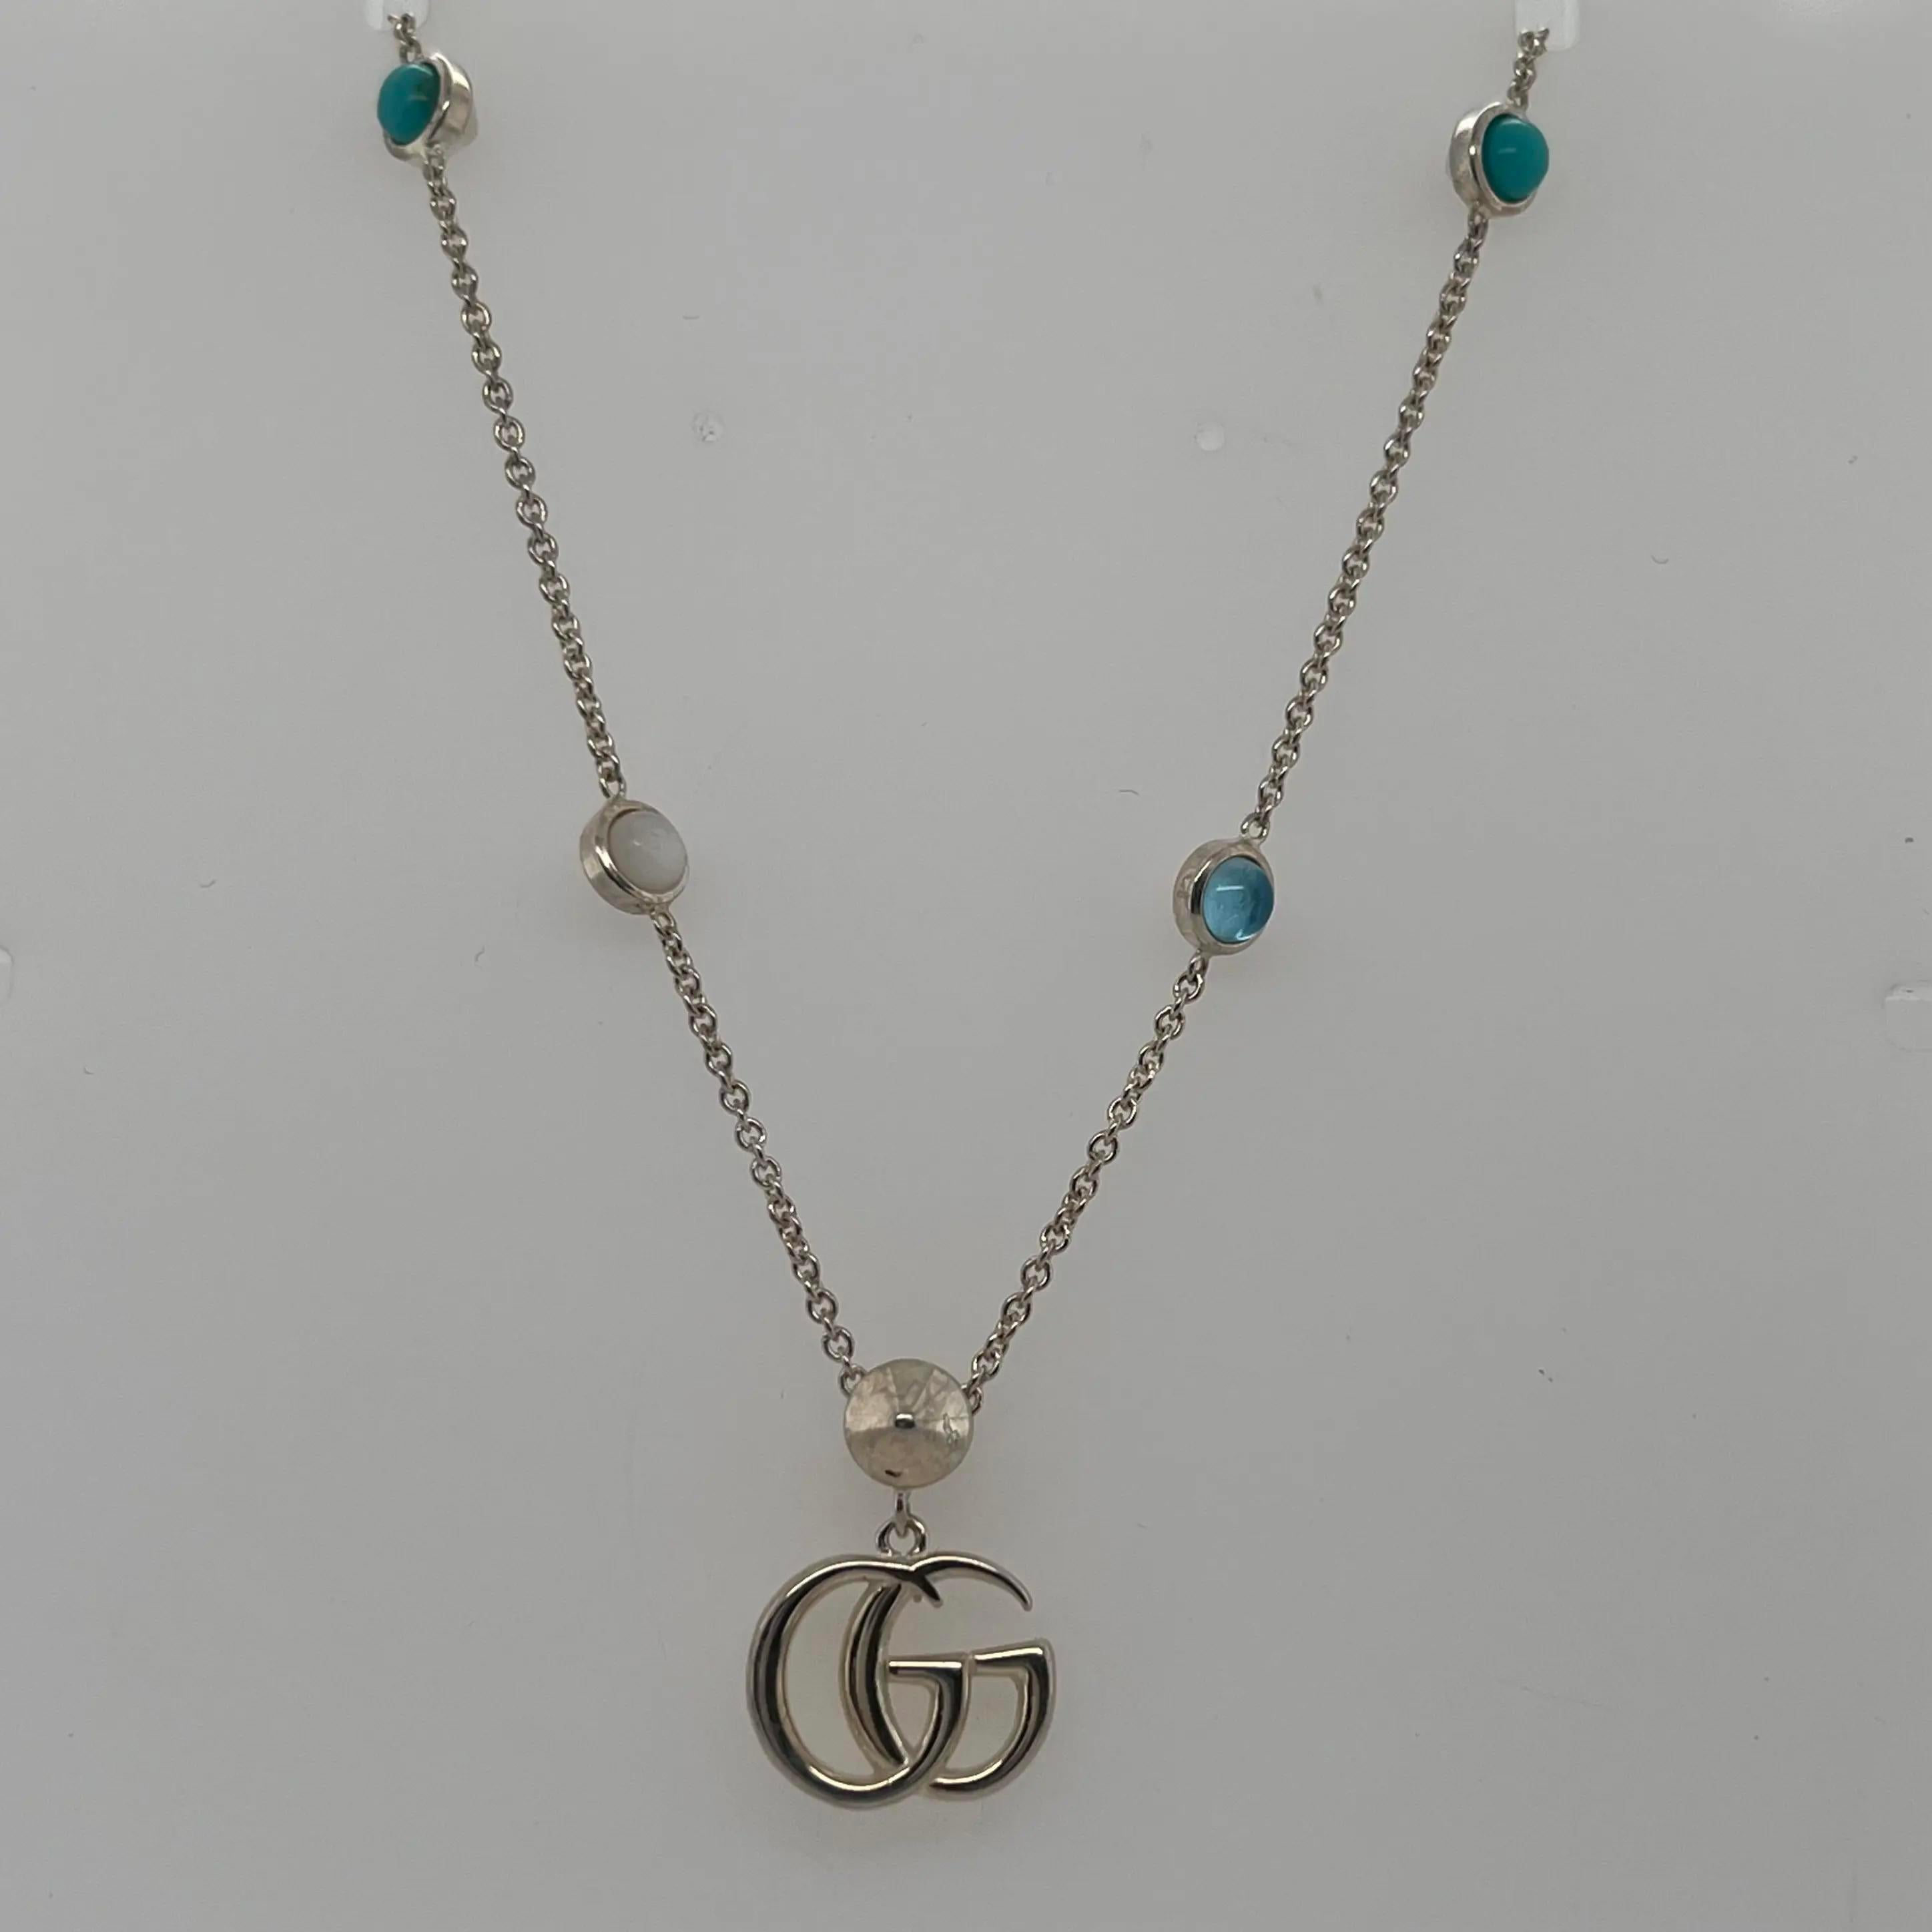 gucci double g necklace